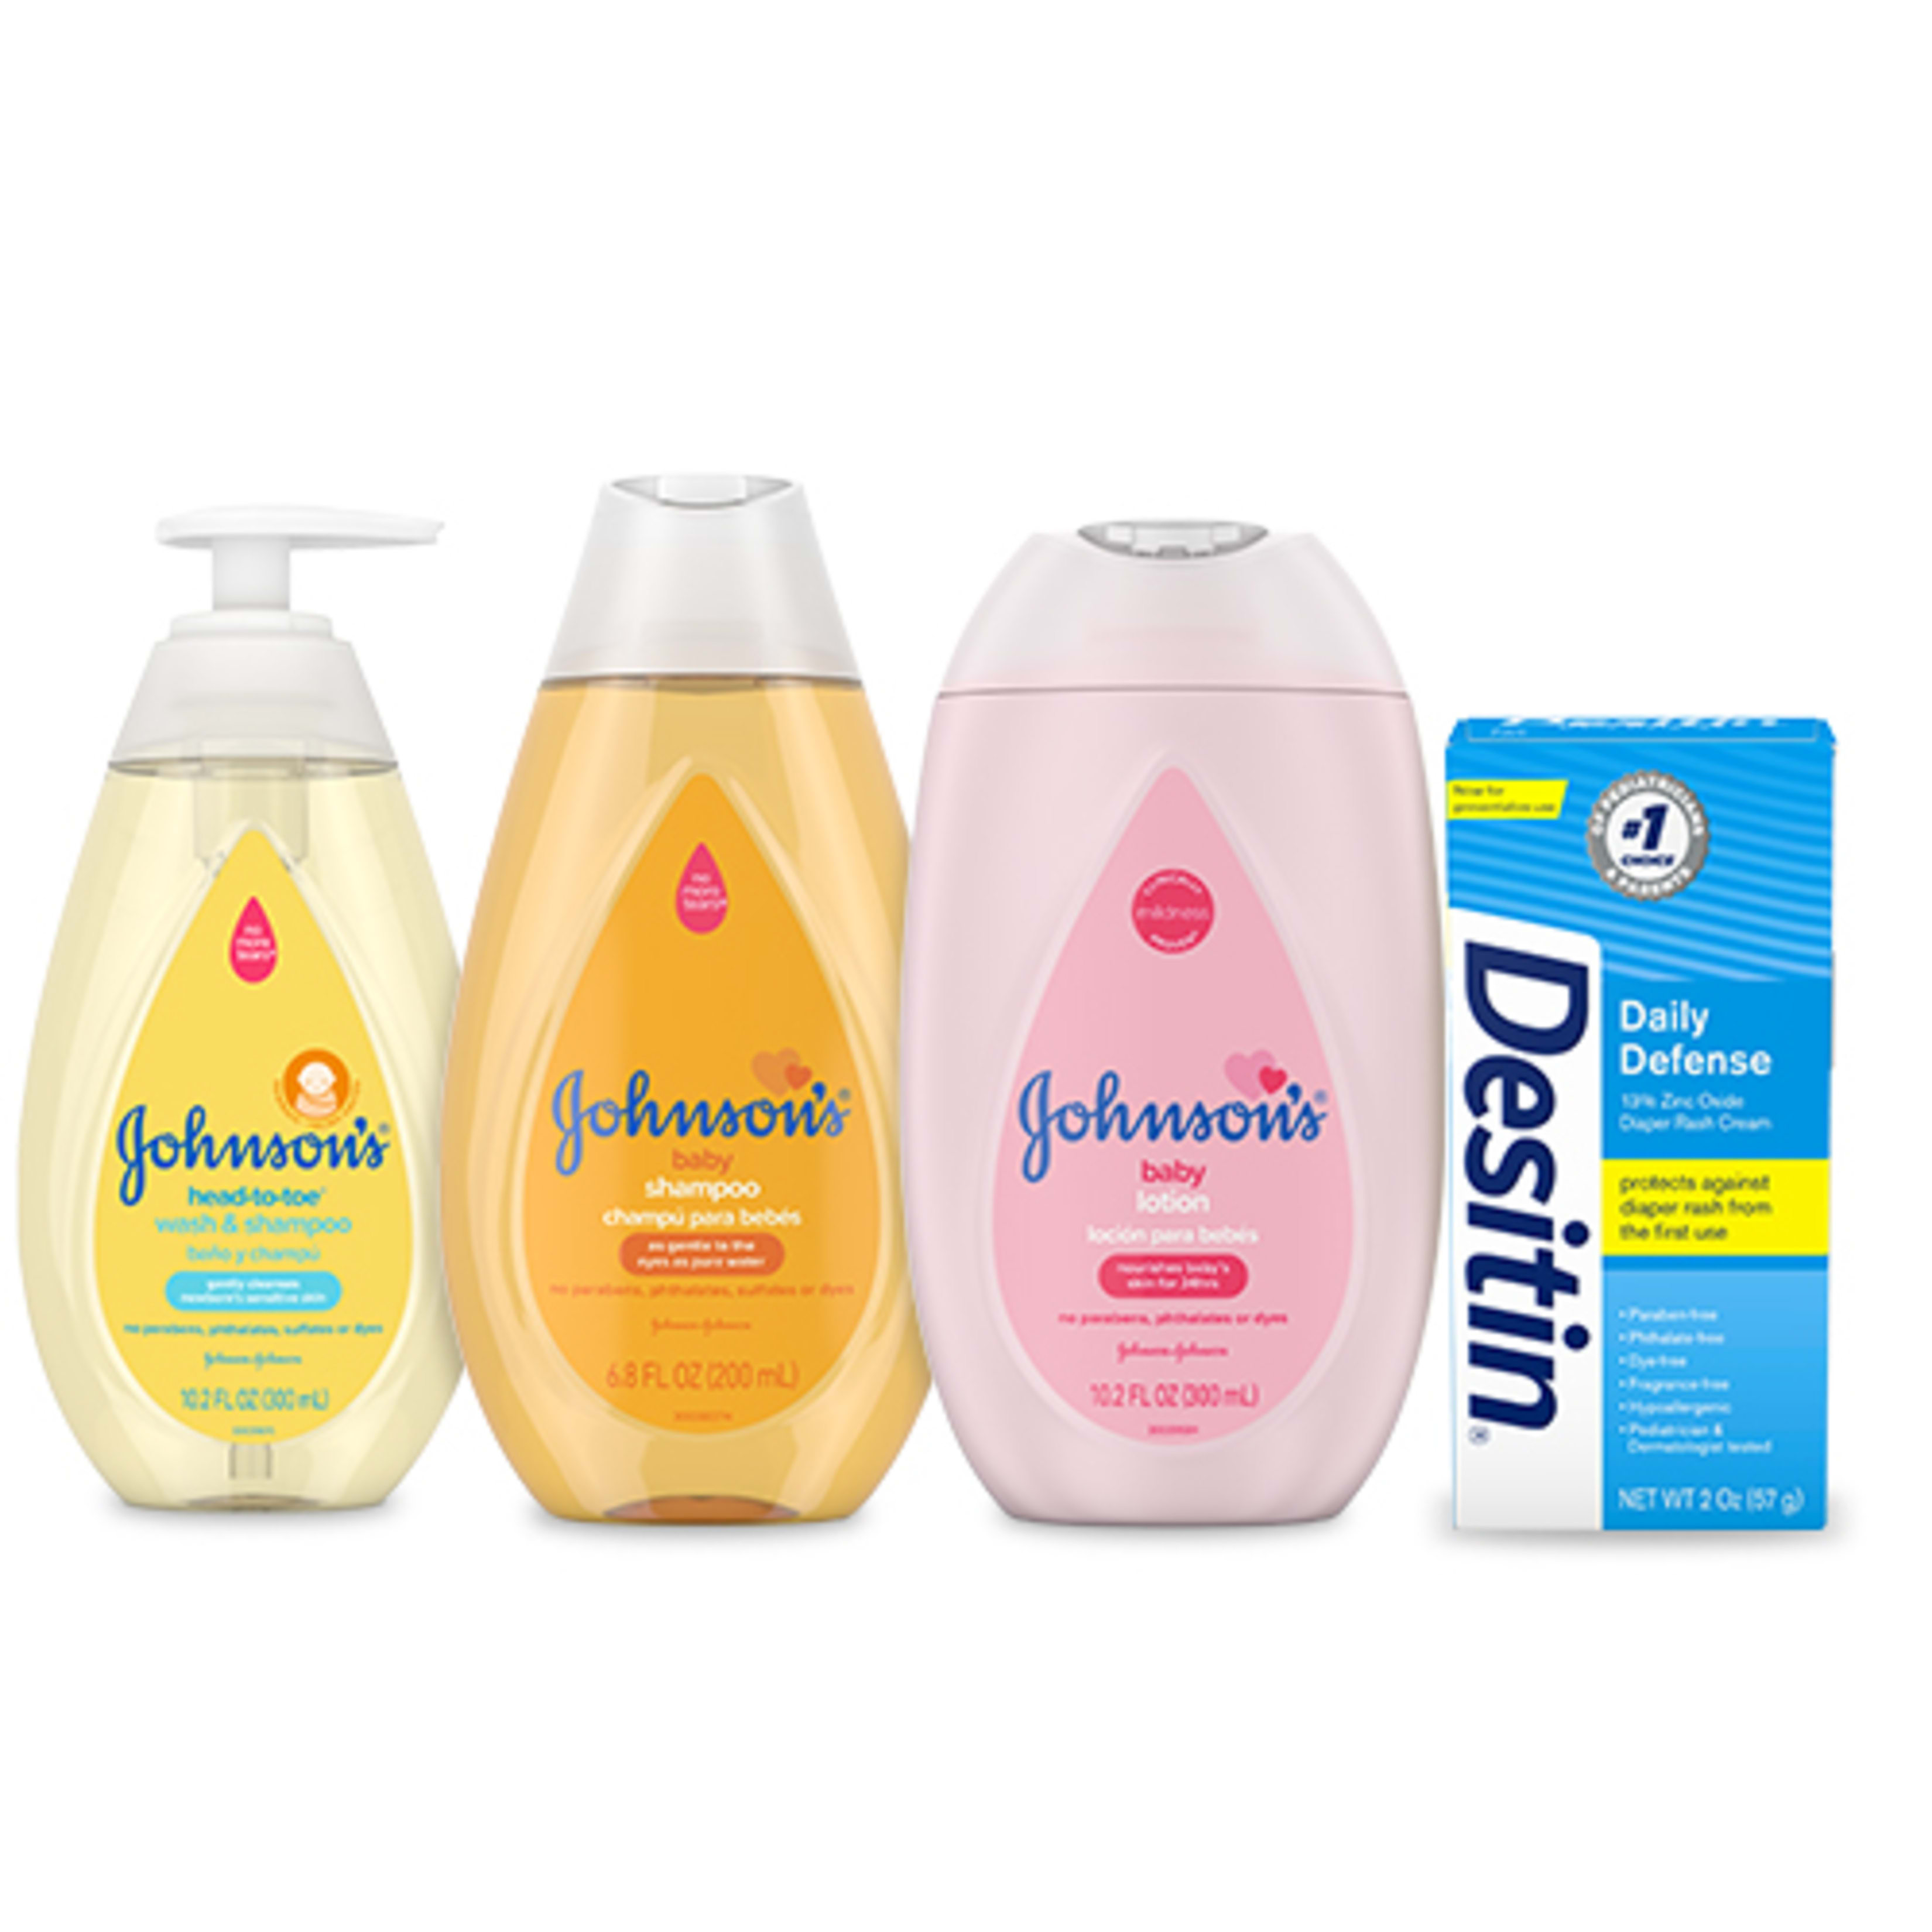 Johnson's First Touch Gift Set, Baby Bath & Skin Products, 5 items - image 1 of 18